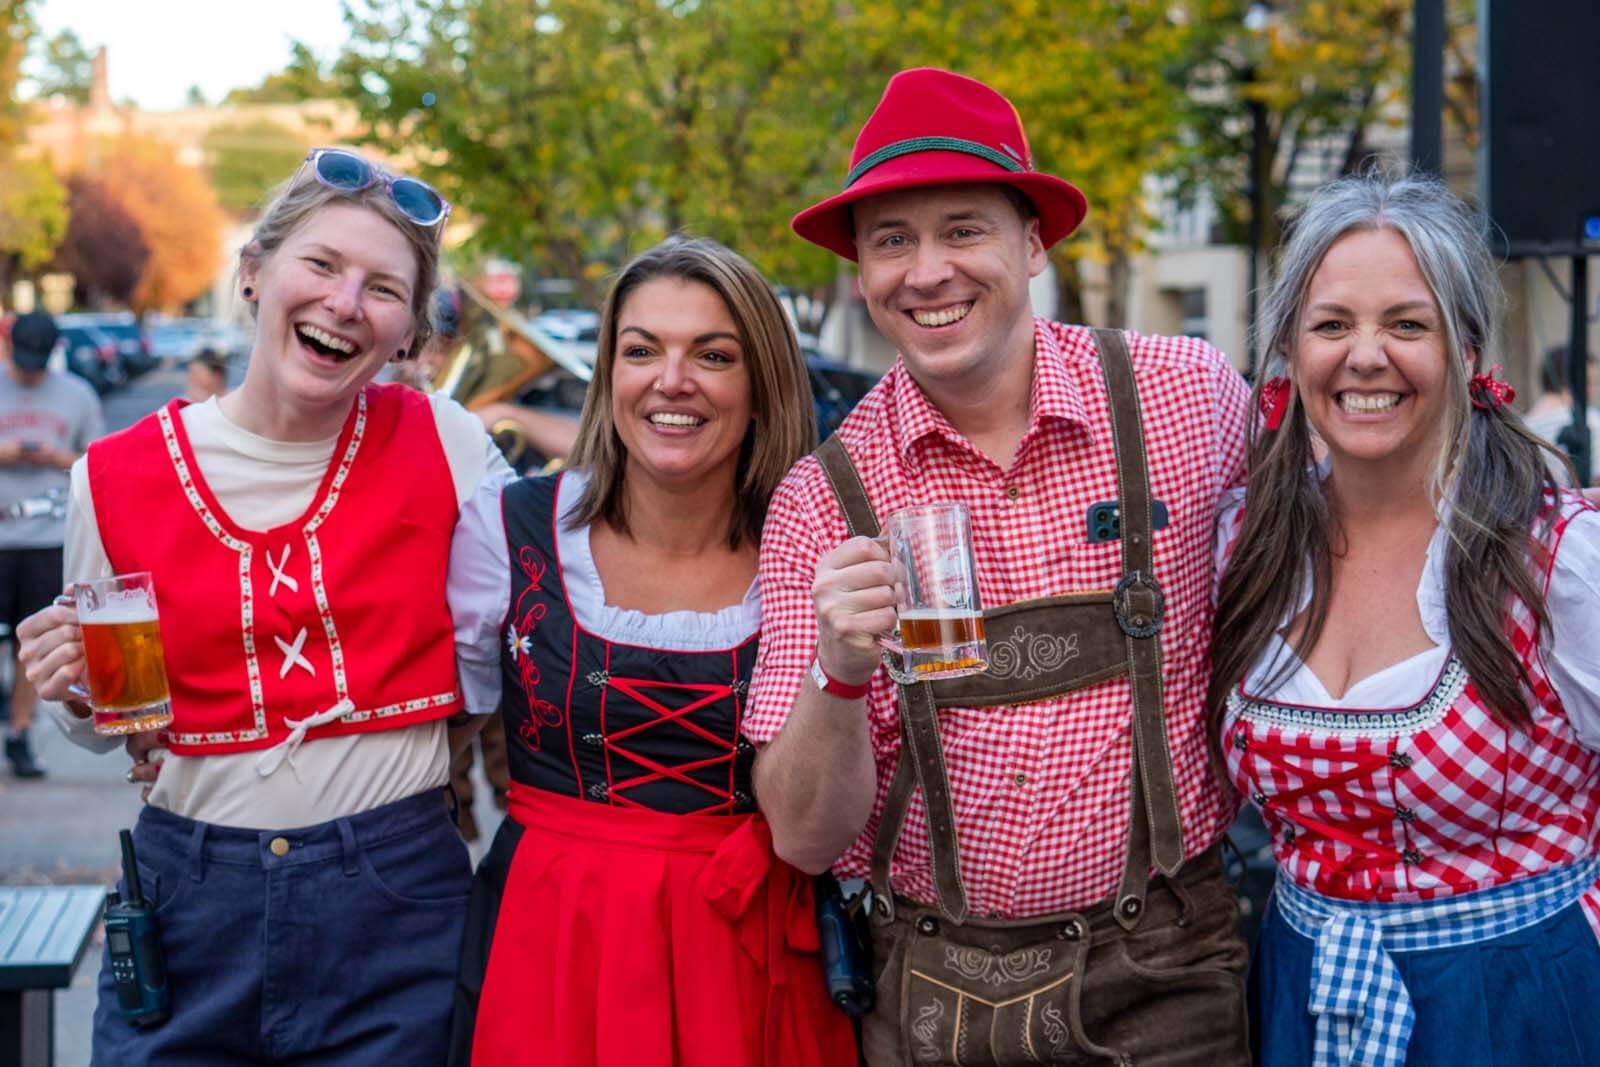 Group of people in costumes at Moscowberfest